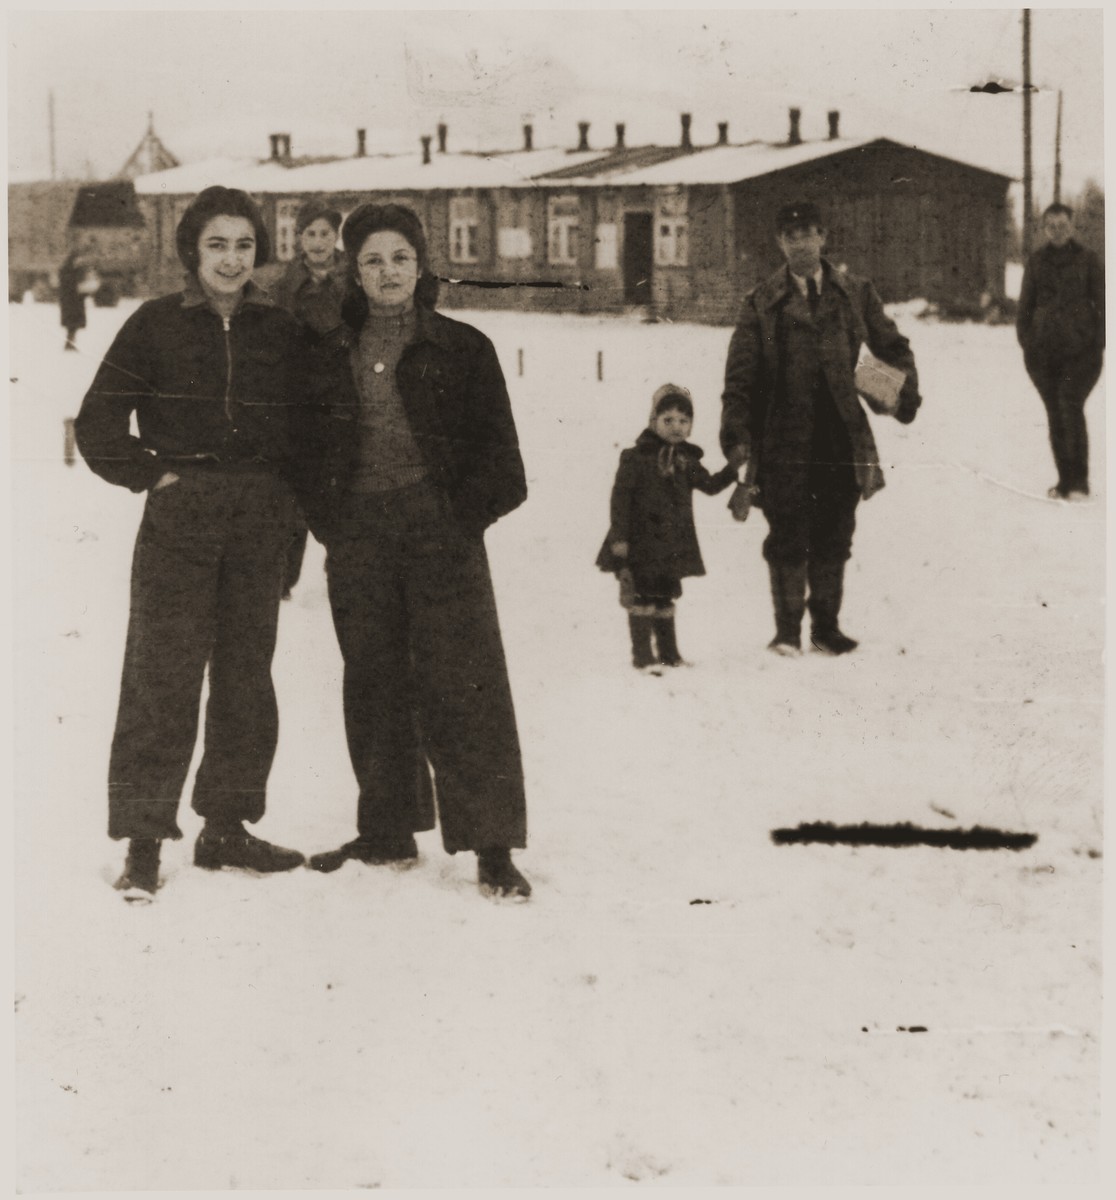 Helen Verblunsky stands with a friend in the snow outside the barracks of an unidentified DP camp in the British zone.